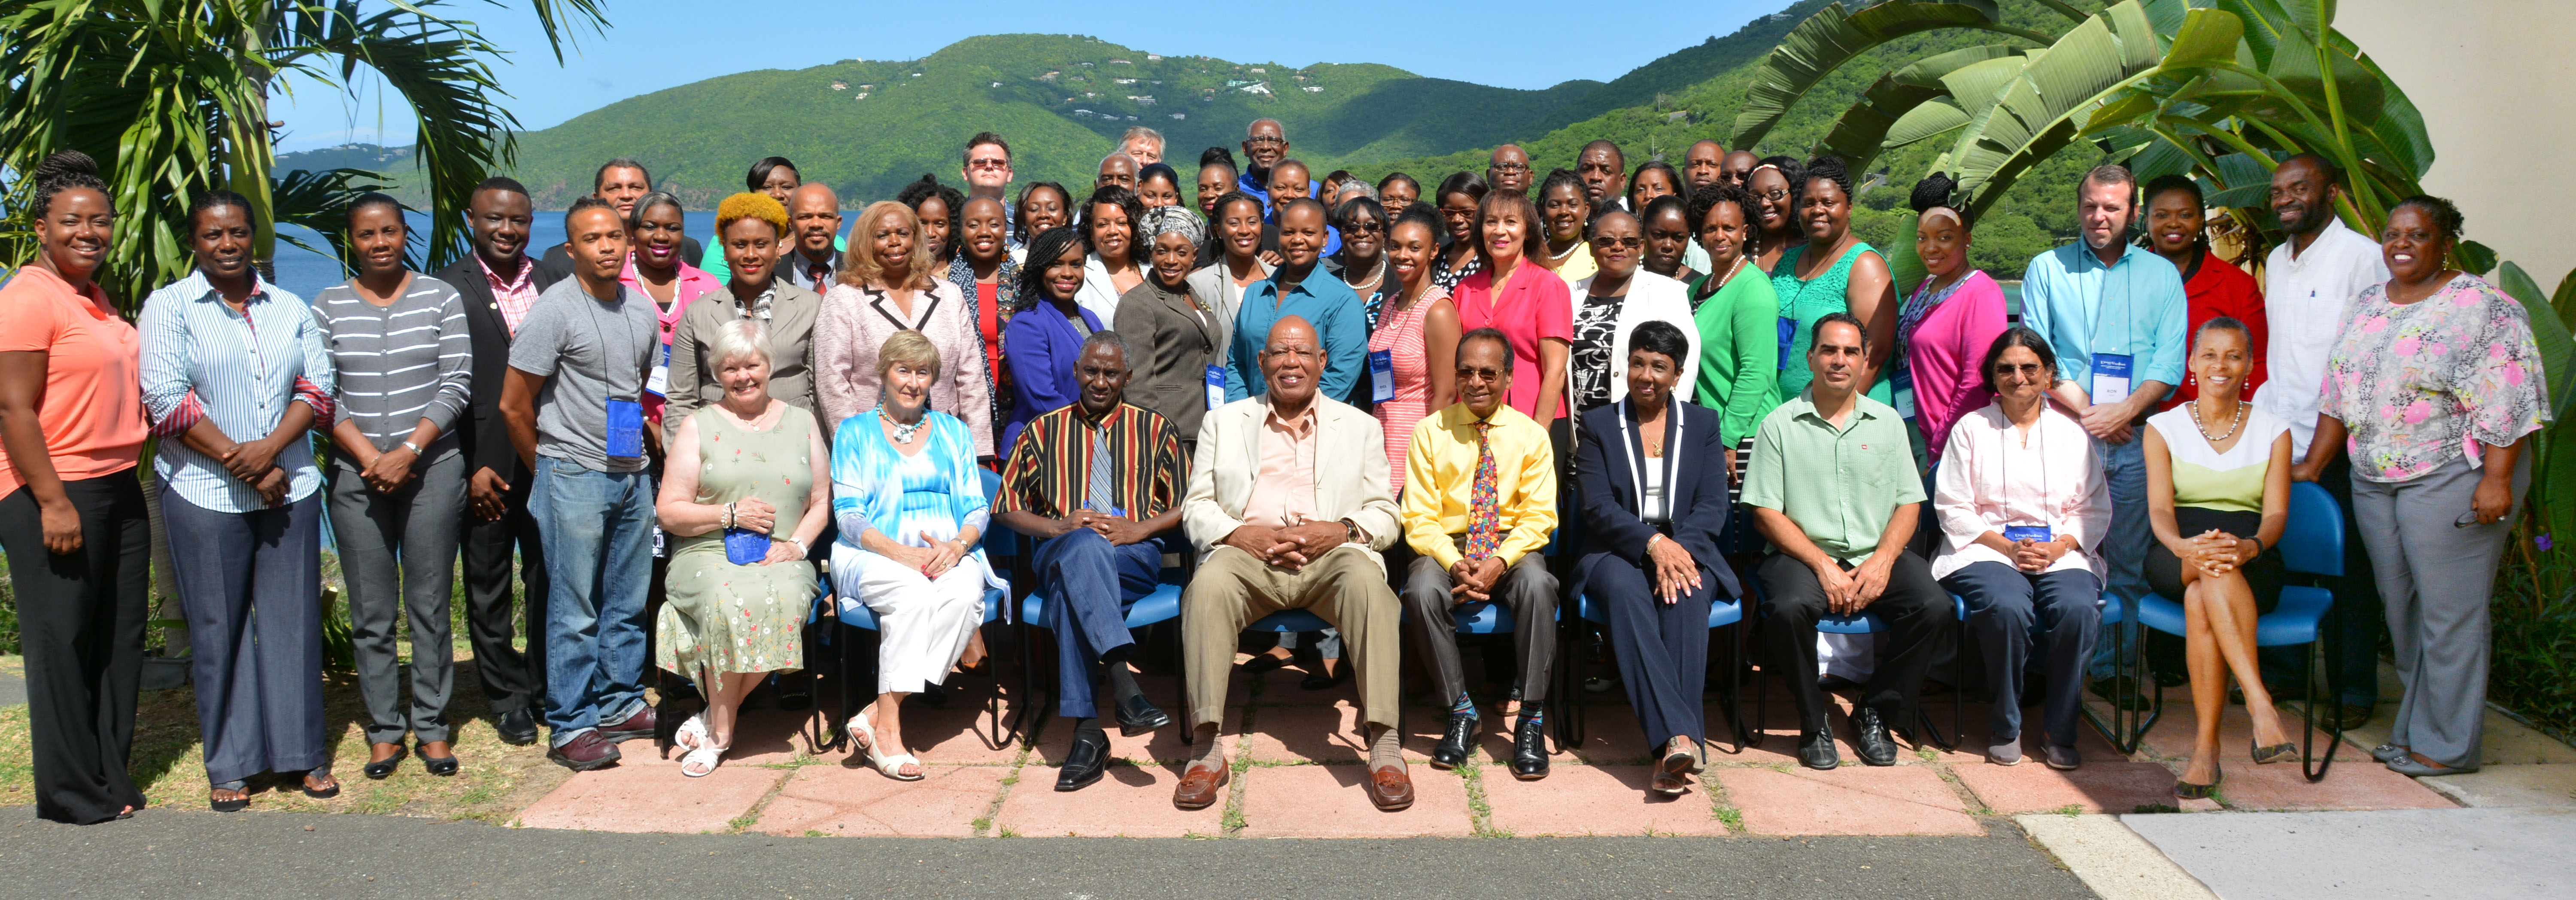 Students enrolled in the UVI inaugural Ph.D. cohort pose for a group photo with their professors and administrators on the UVI St. Thomas Campus.